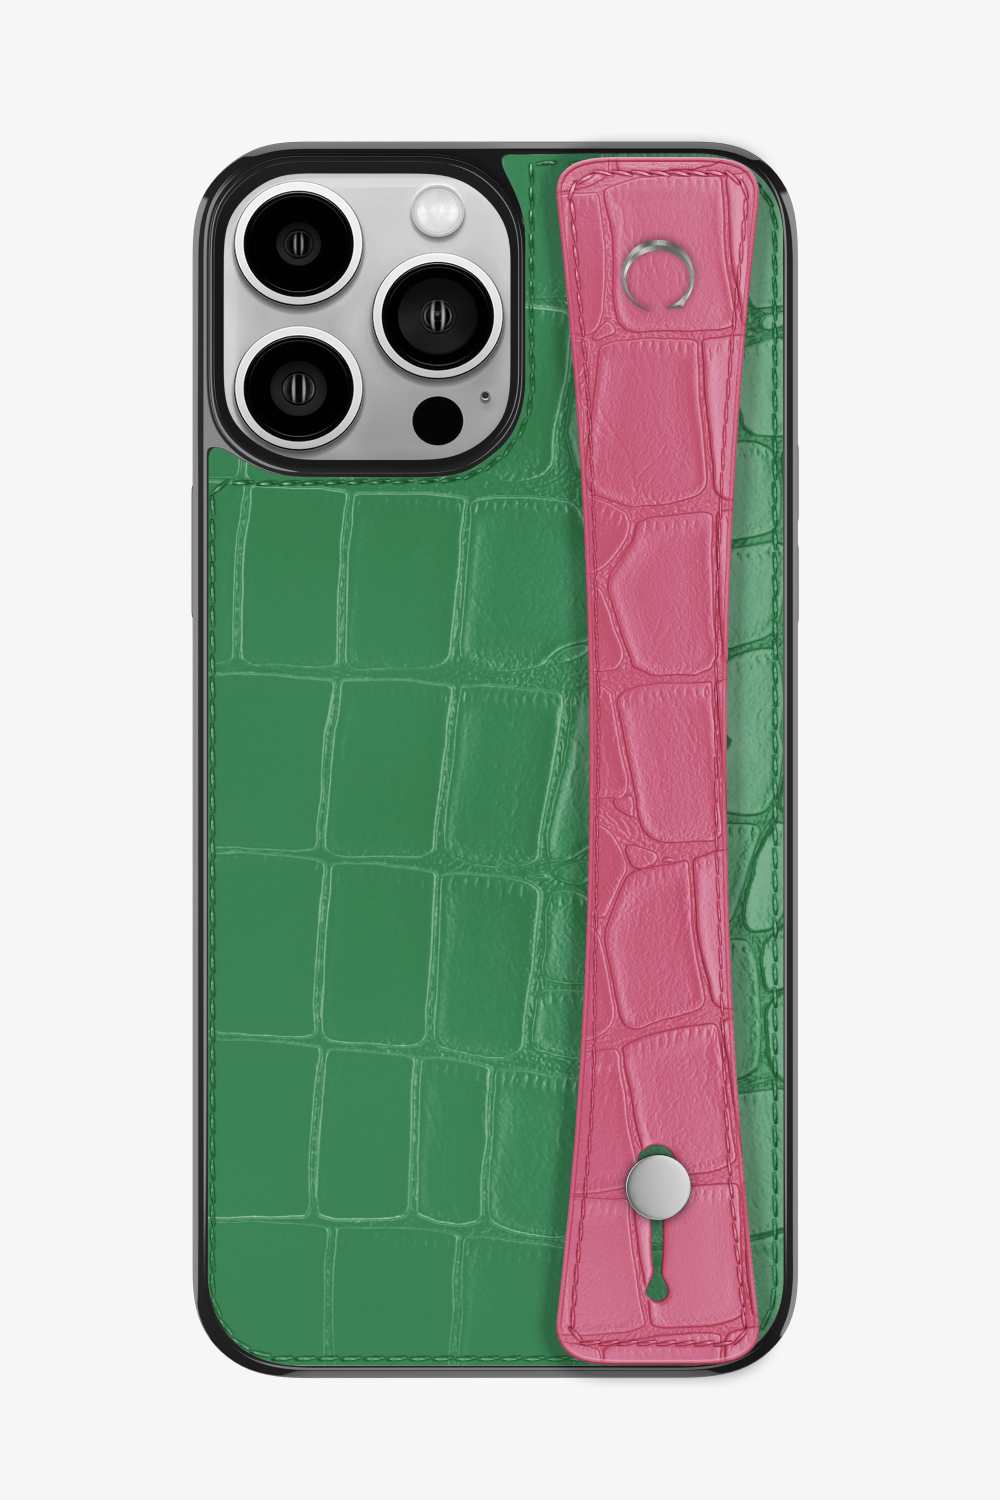 Alligator Sports Strap Case for iPhone 15 Pro Max - Green Emerald / Pink - zollofrance